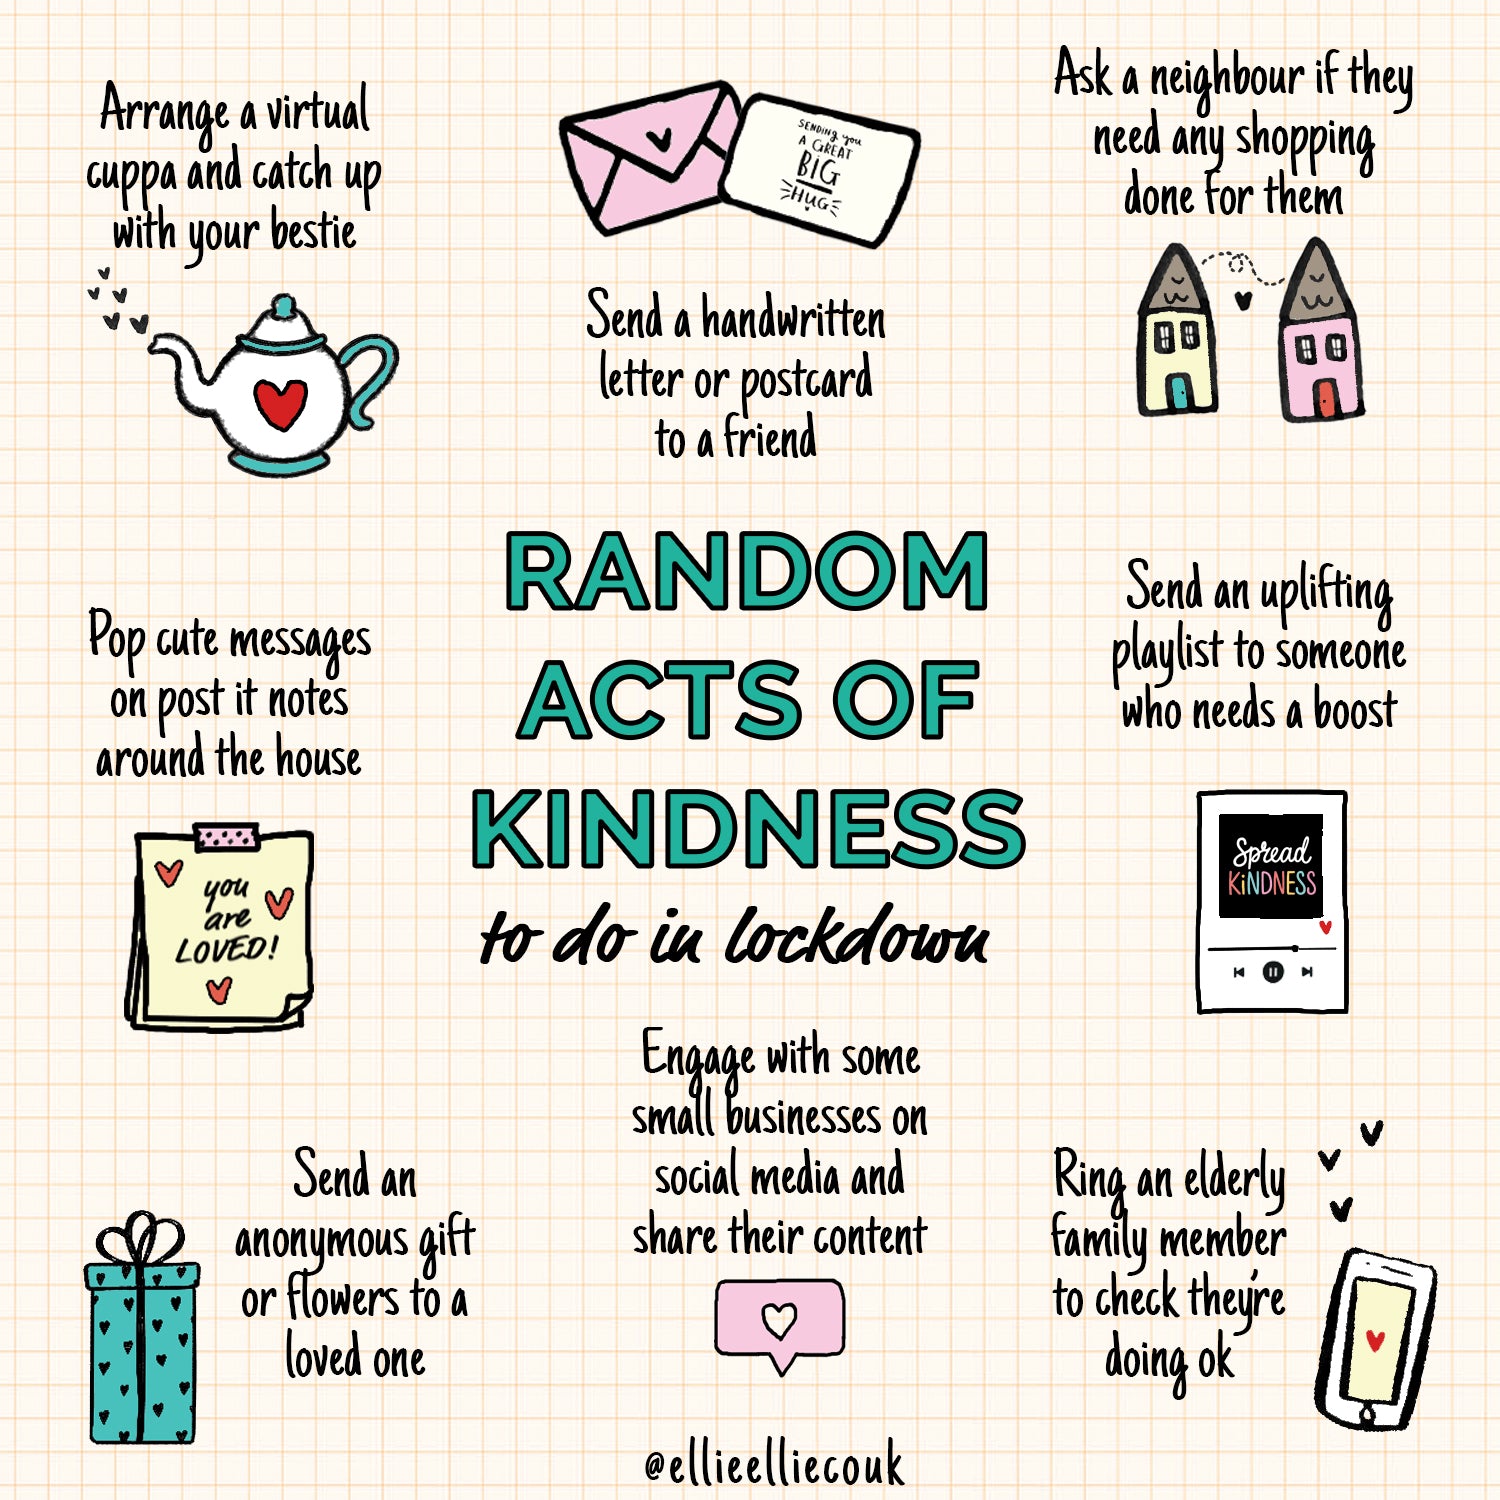 random-acts-of-kindness-in-lockdown-ideas-and-win-a-care-package